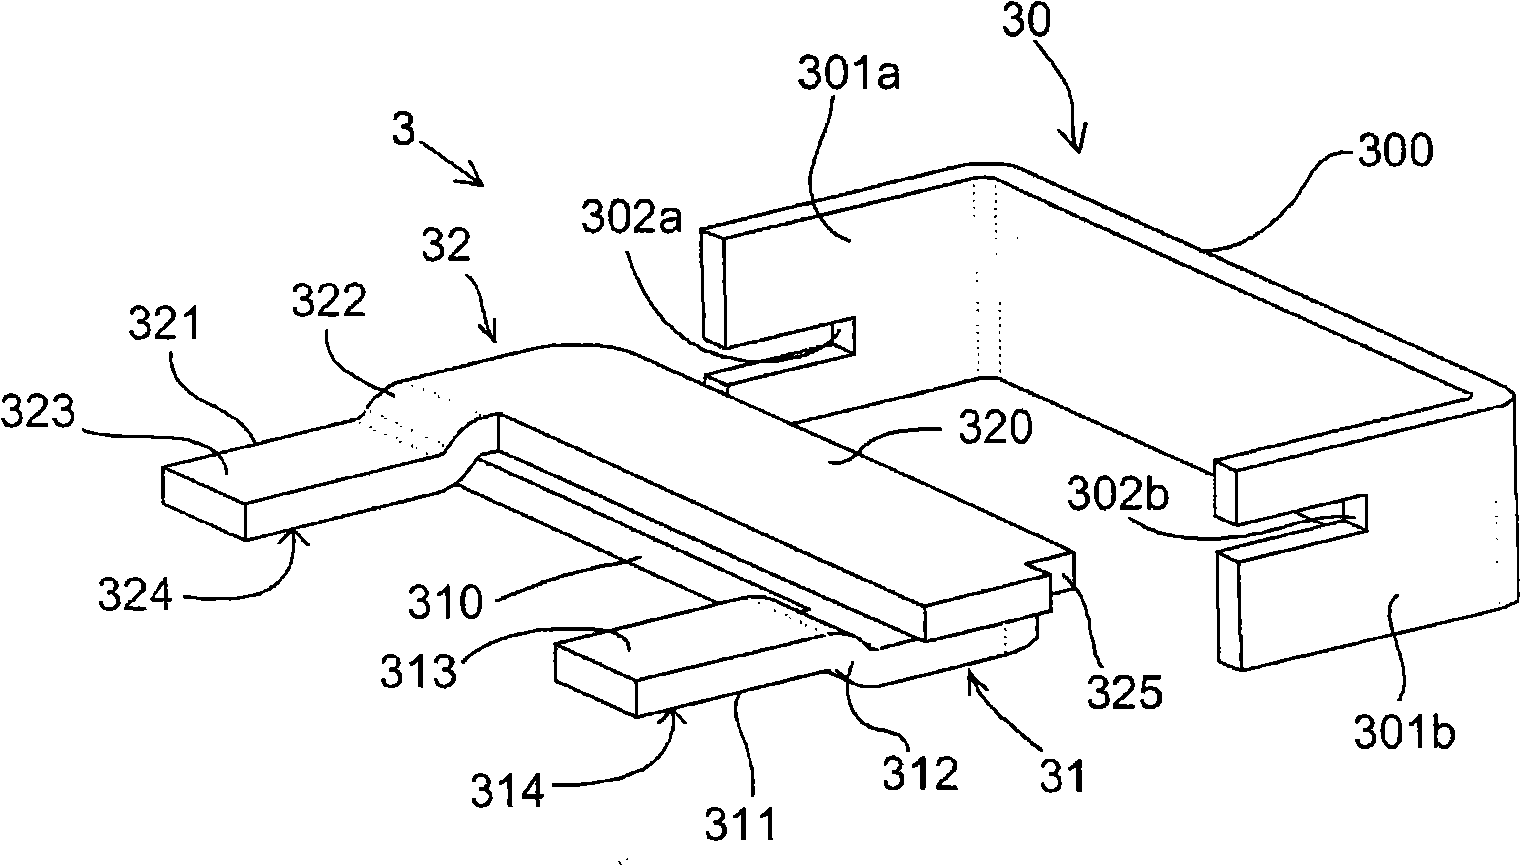 Stand-alone device for generating electrical energy